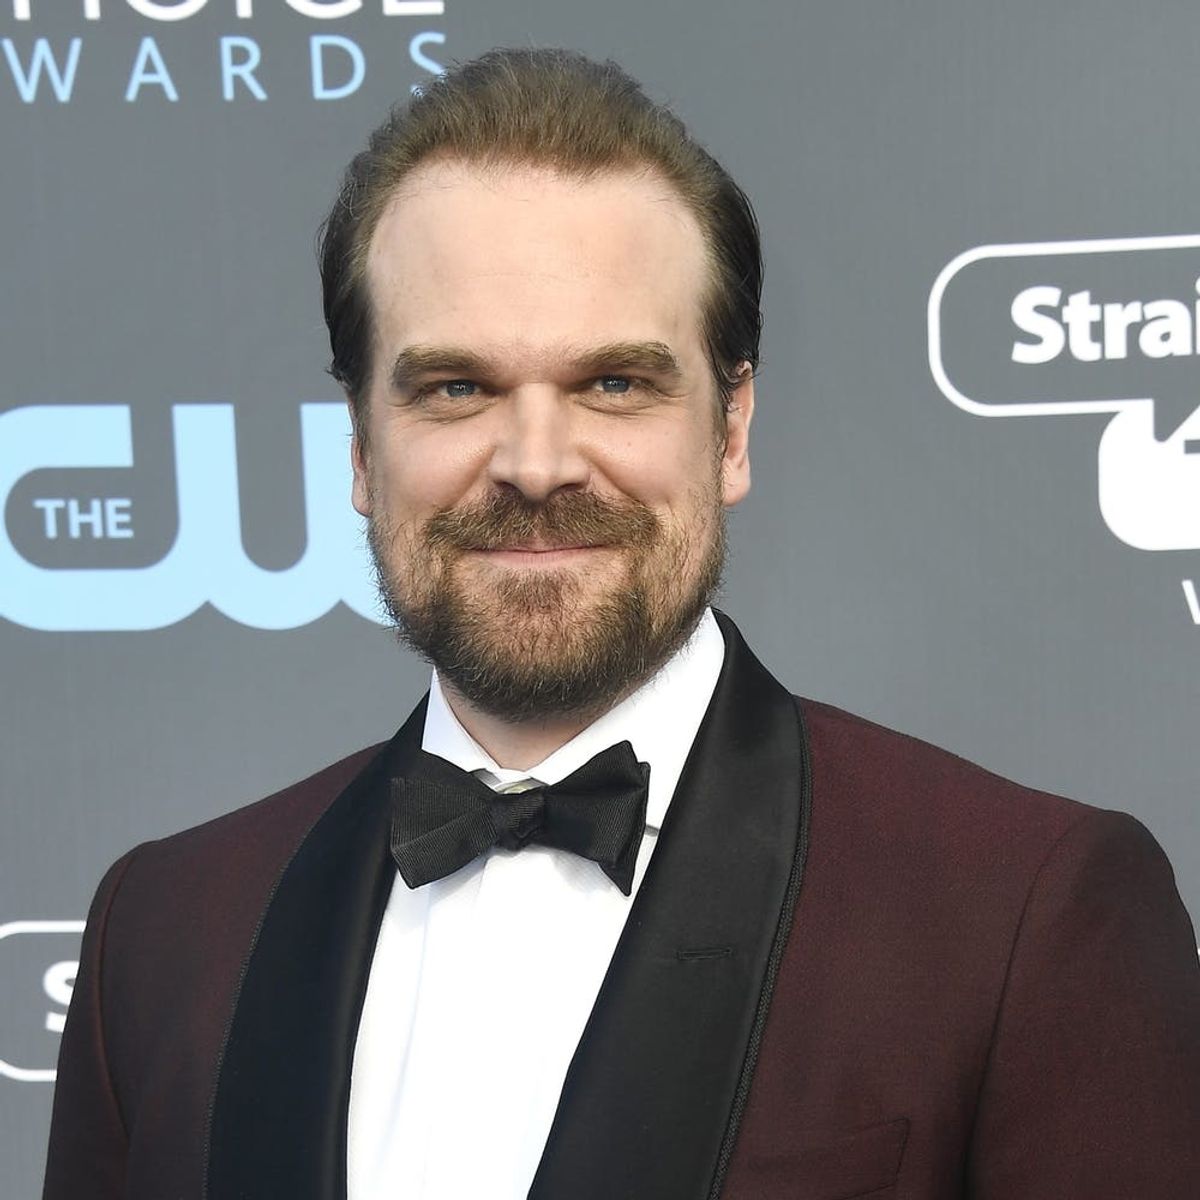 ‘Stranger Things’ Star David Harbour Will Officiate a Fan’s Wedding, Thanks to Twitter